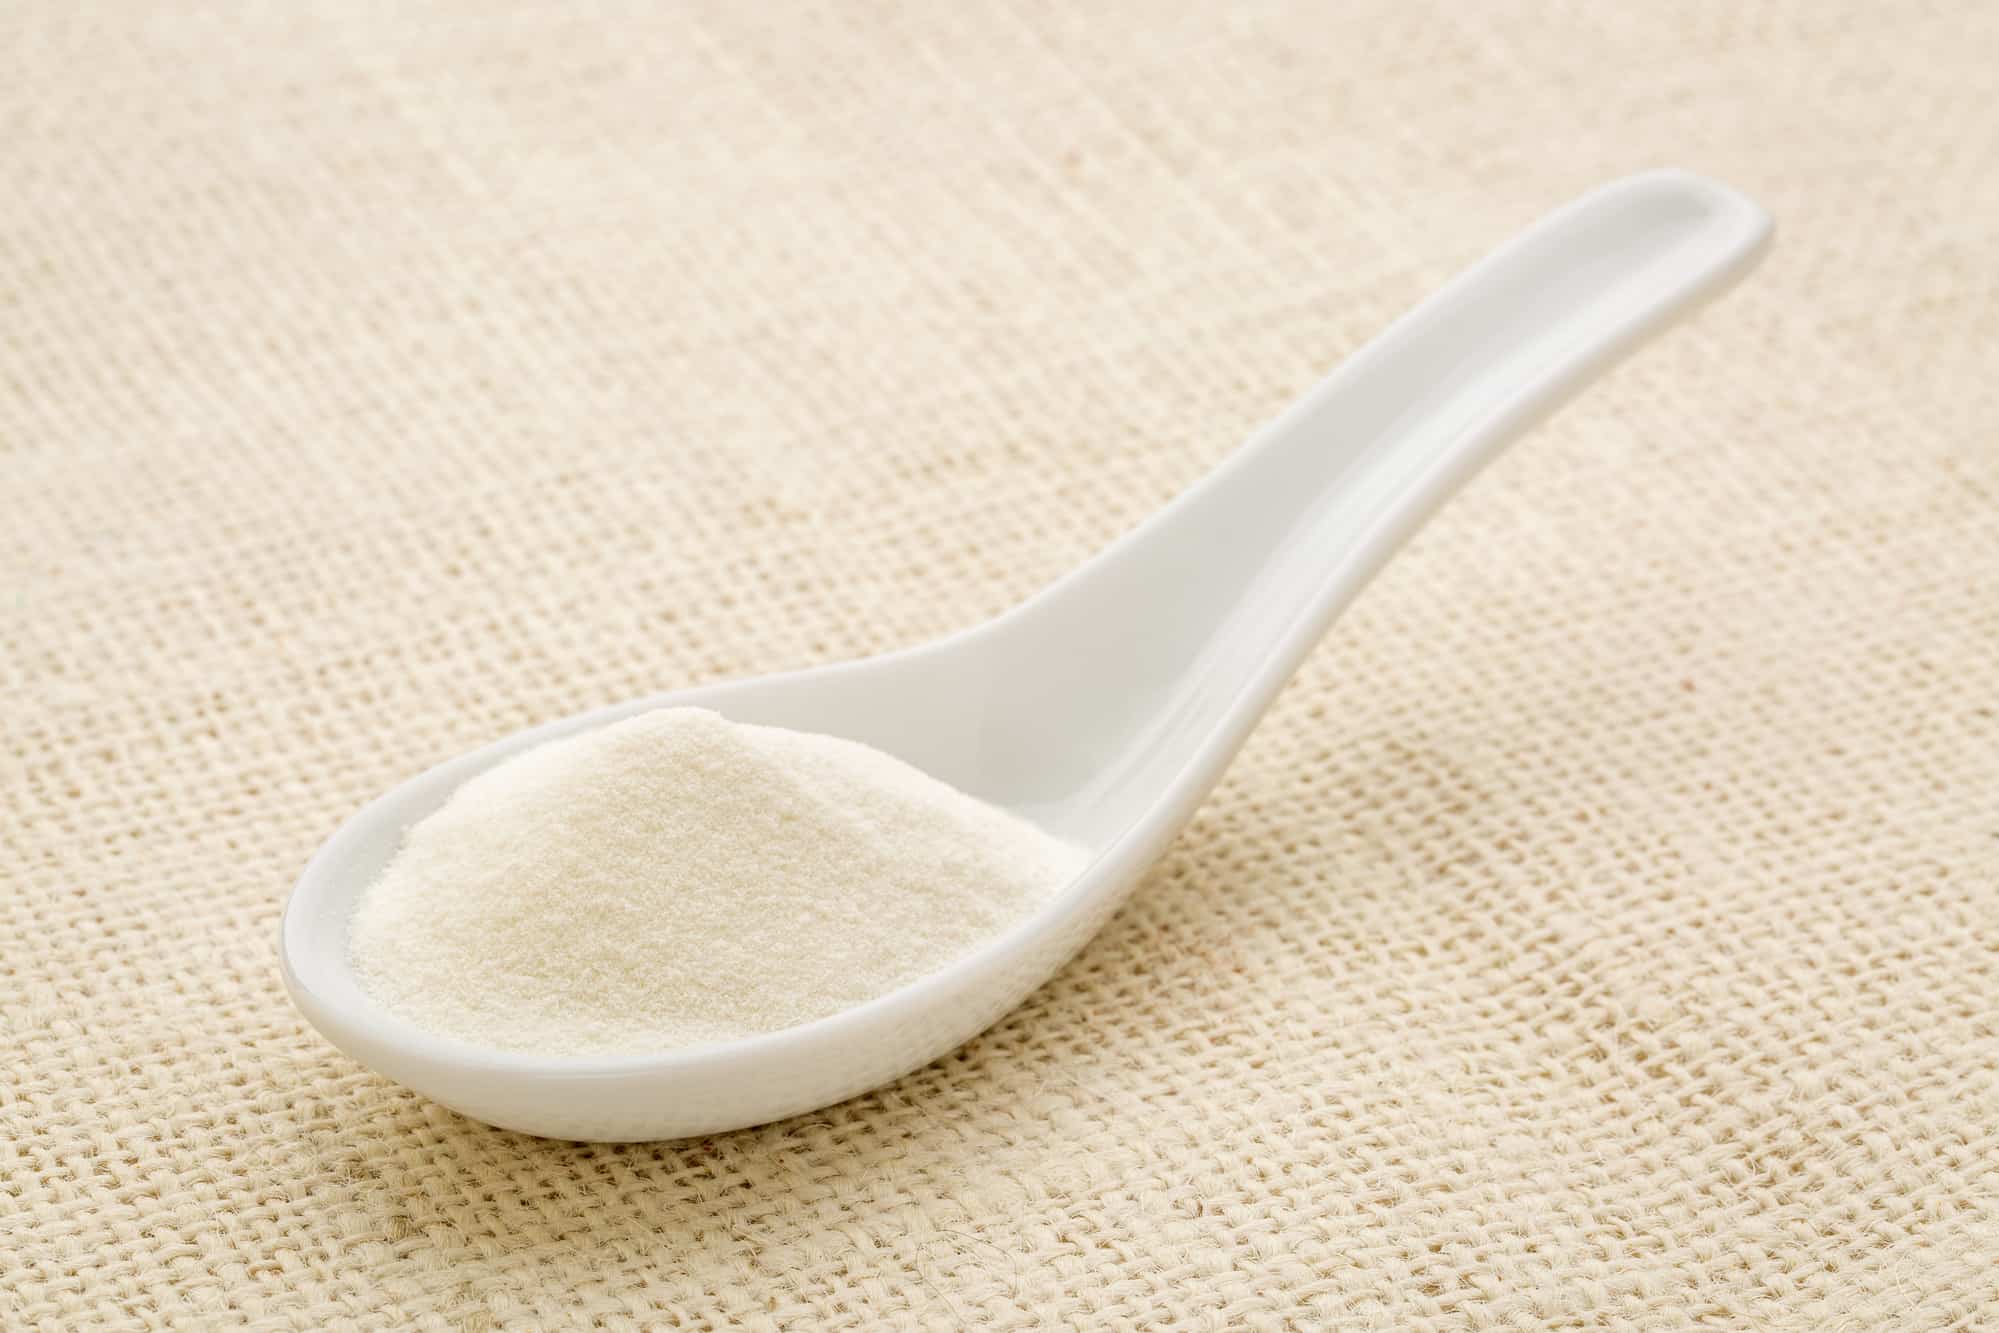 collagen protein powder on a white Chinese spoon against burlap canvas